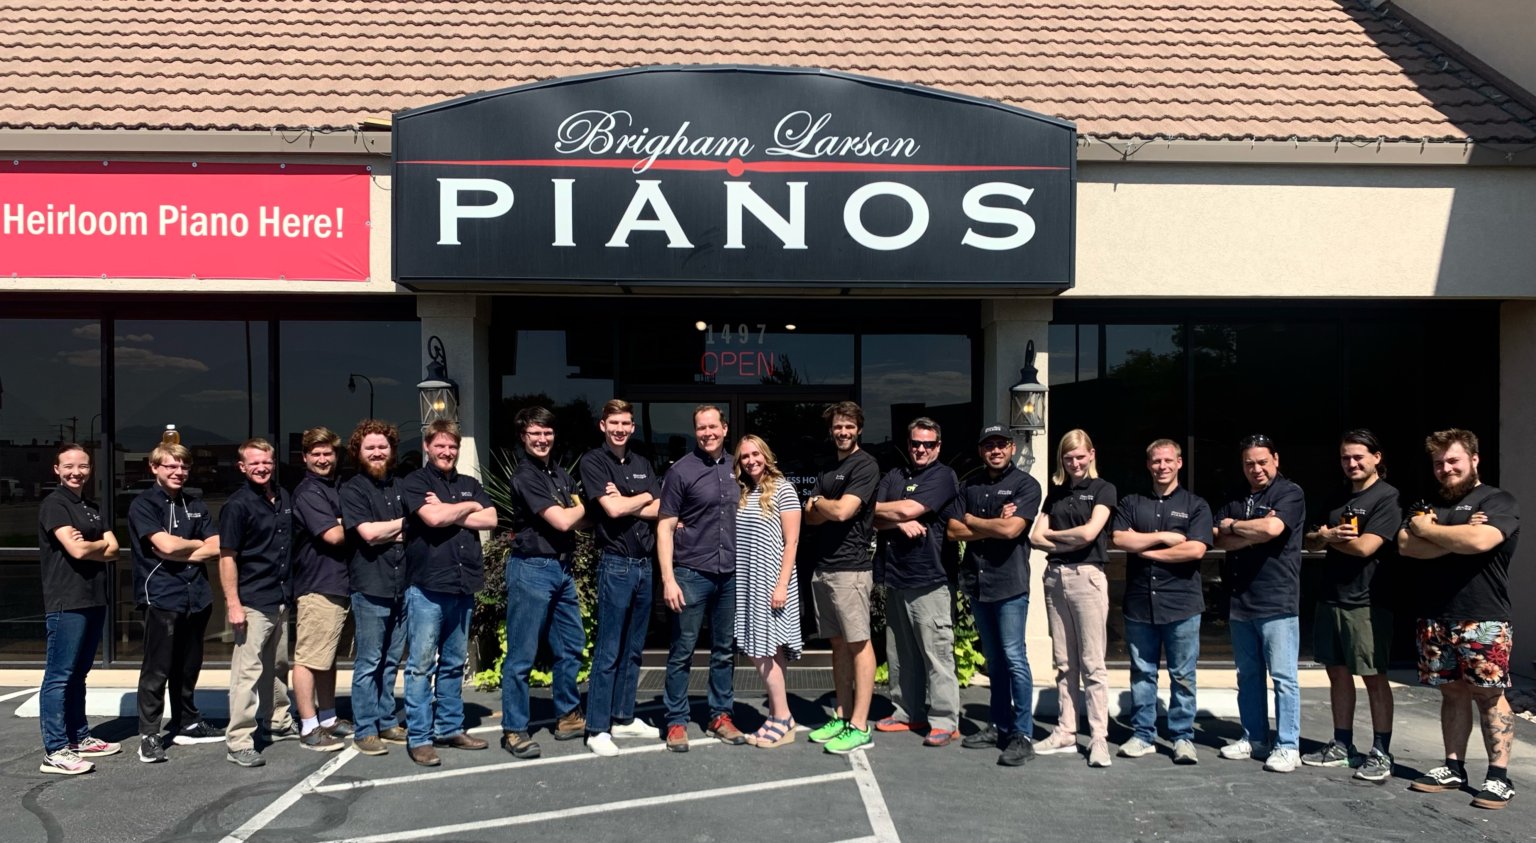 Brigham Larson Pianos Team of Piano Rebuilders & Tuners with Owners Brigham & Karmel